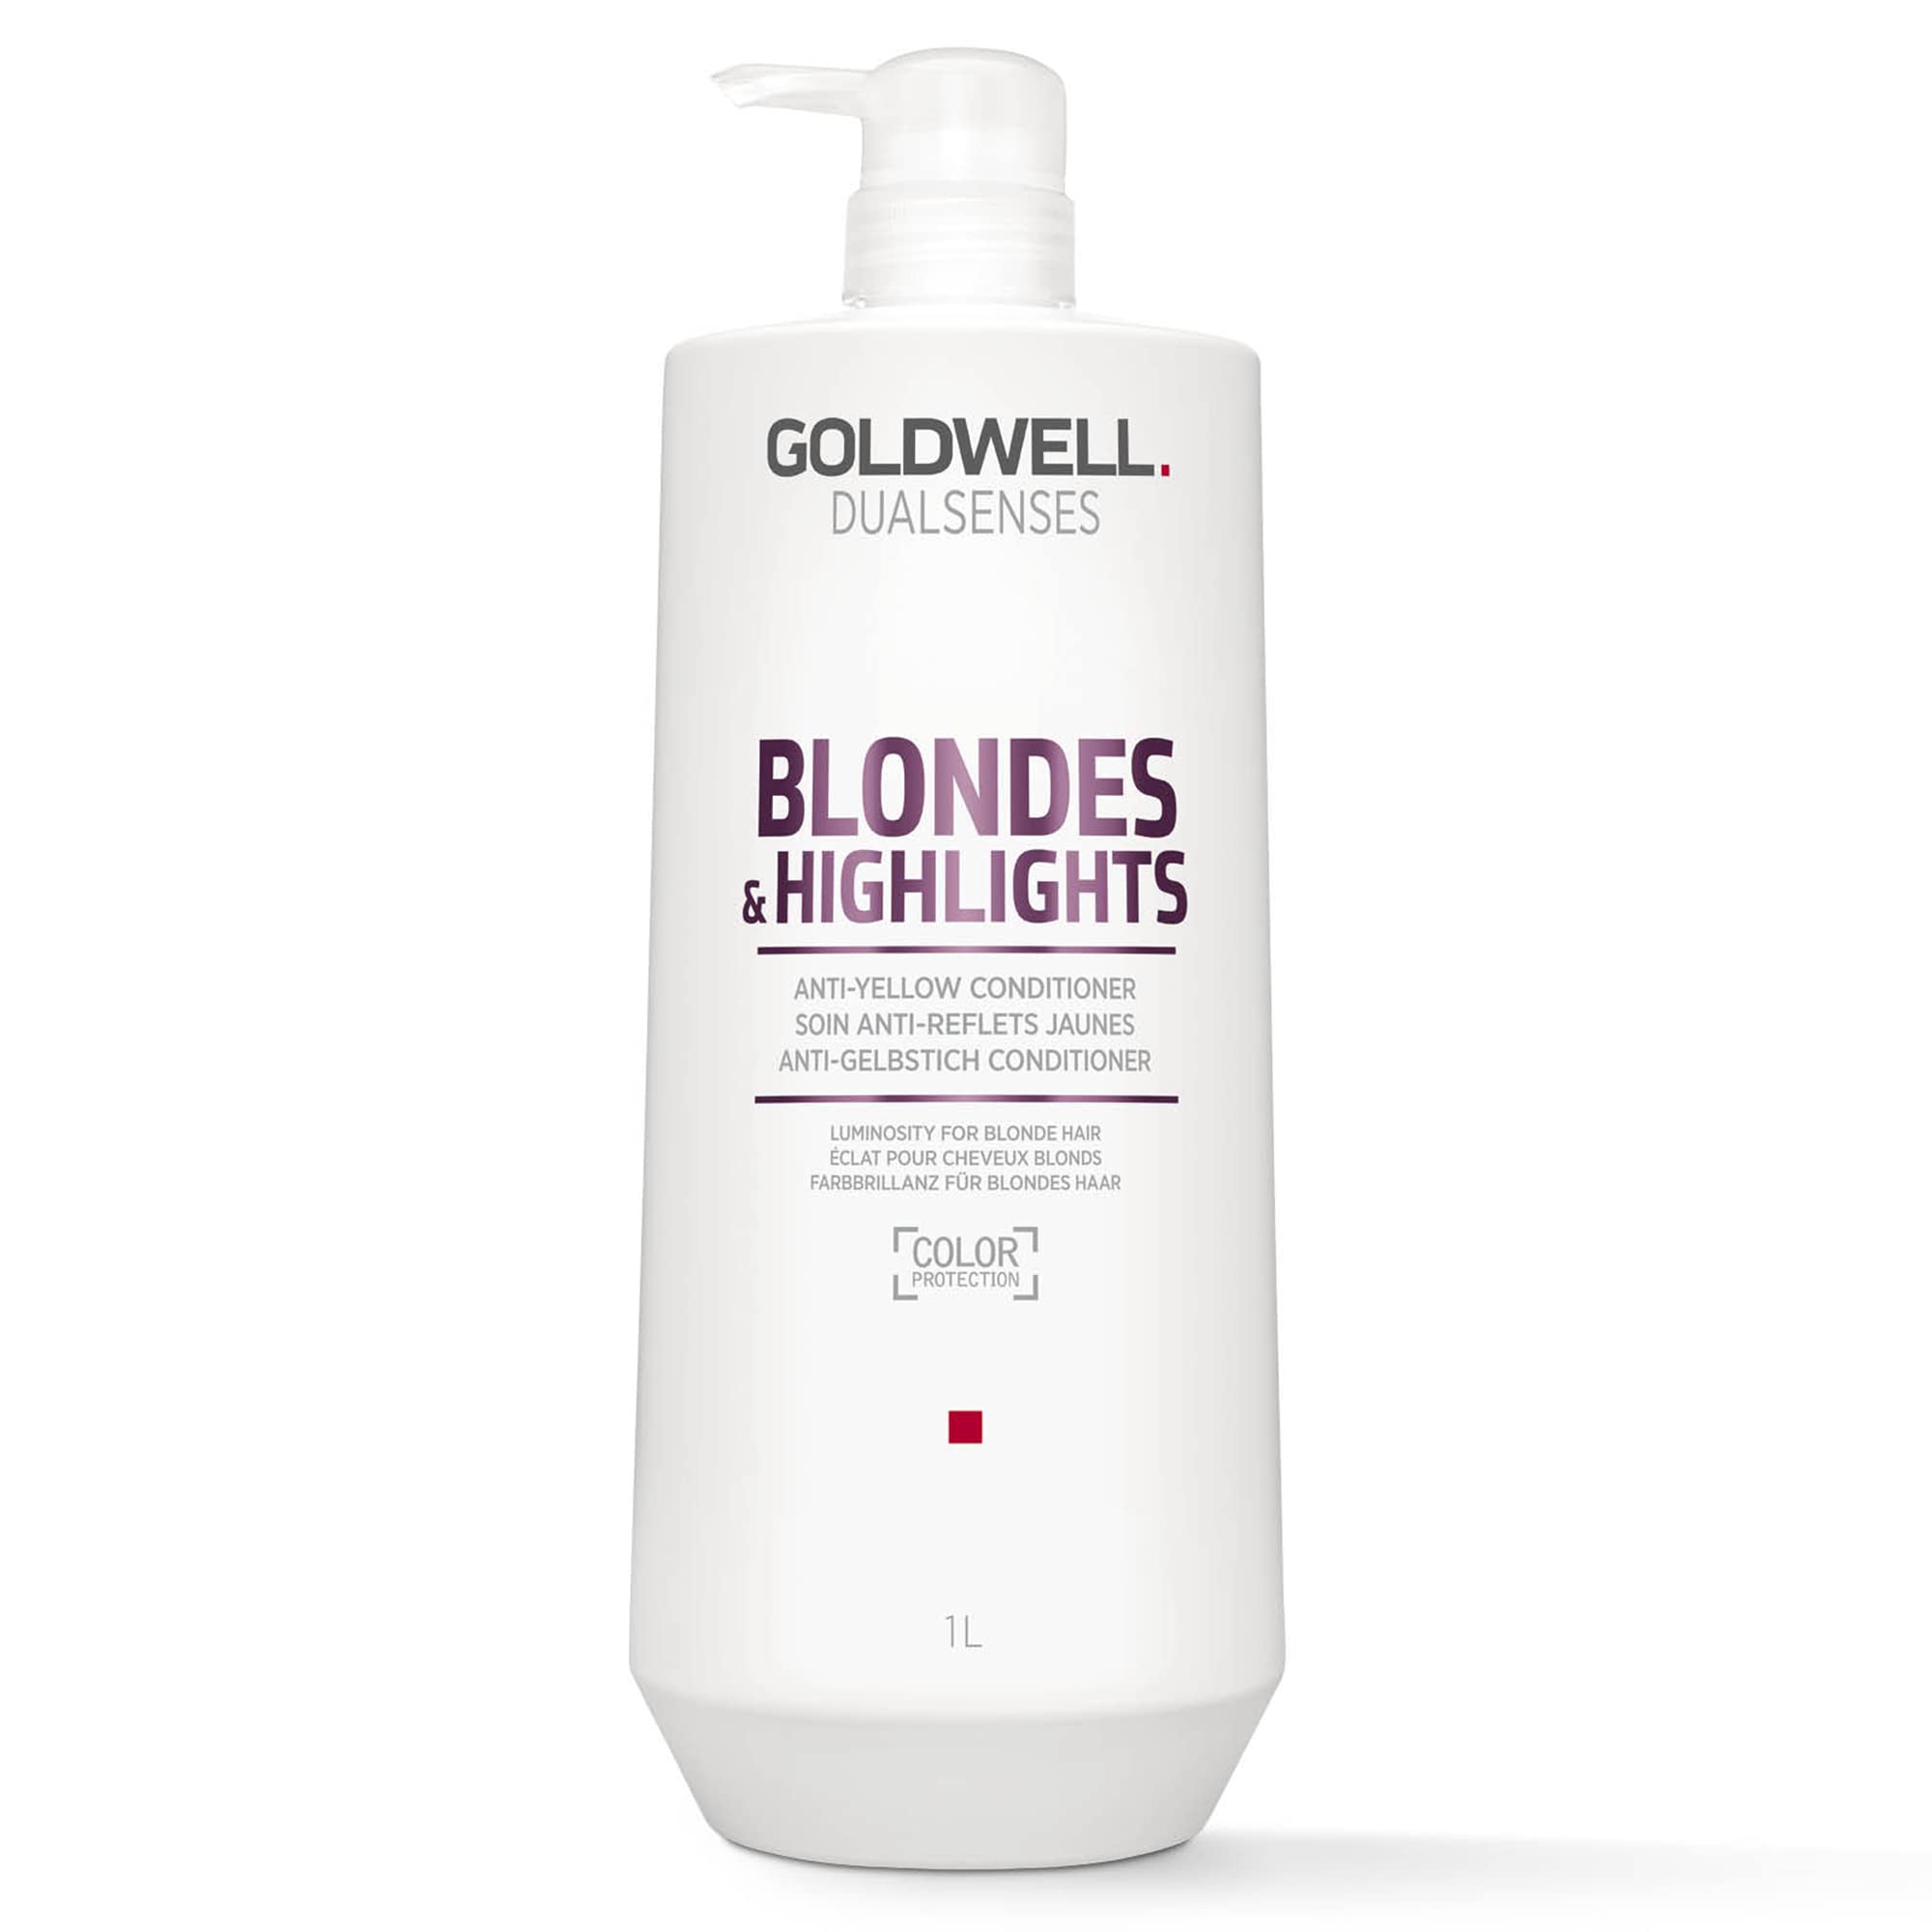 Goldwell Dualsenses | Blondes & Highlights Conditioner 1L